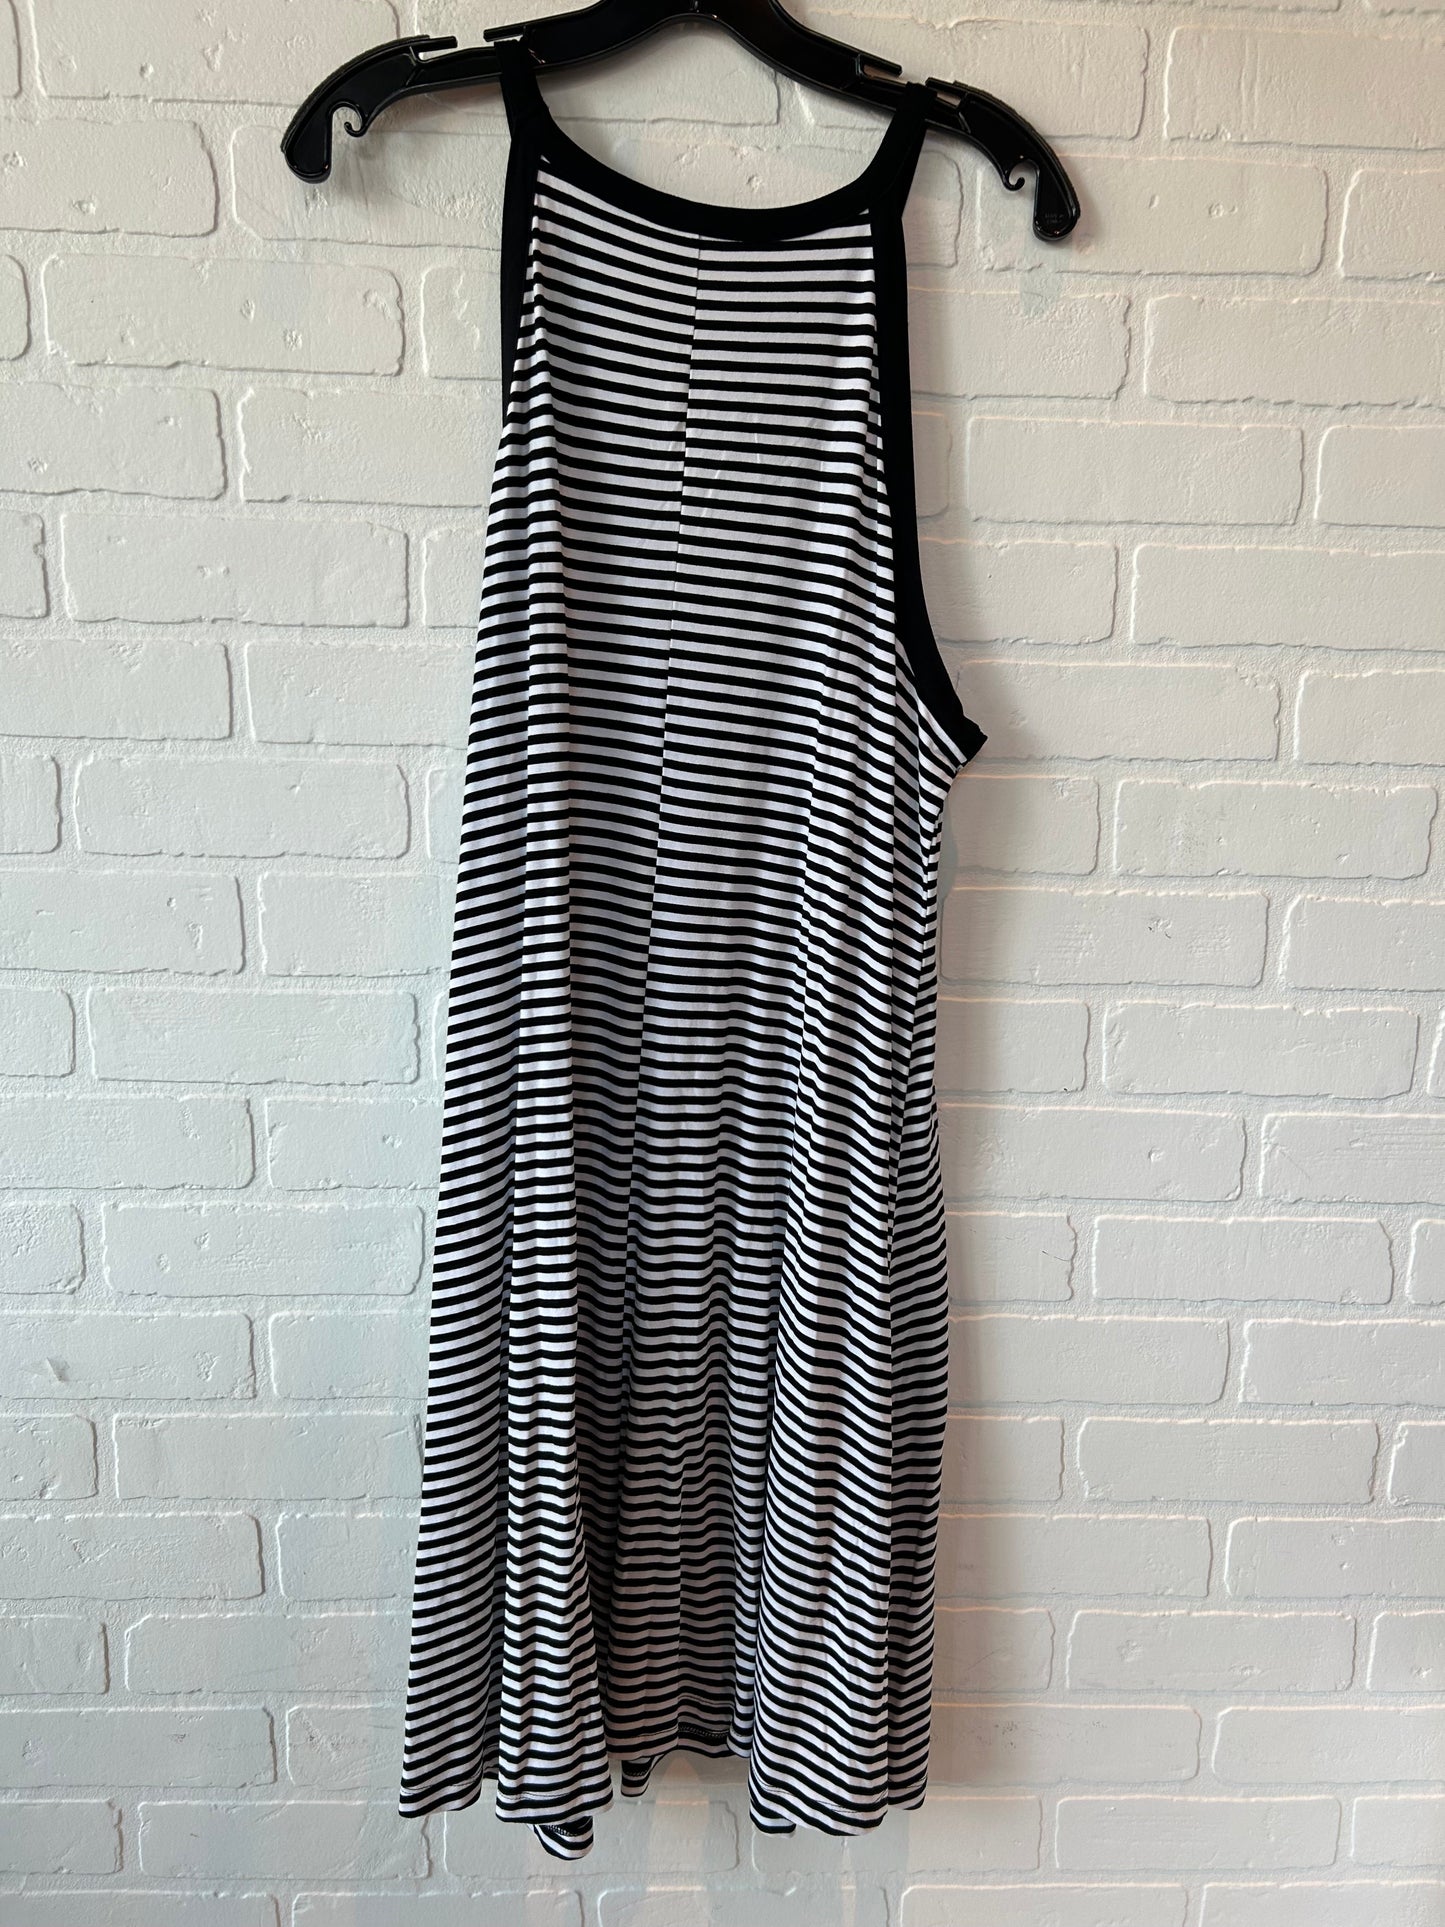 Black & White Dress Casual Short Old Navy, Size Xl